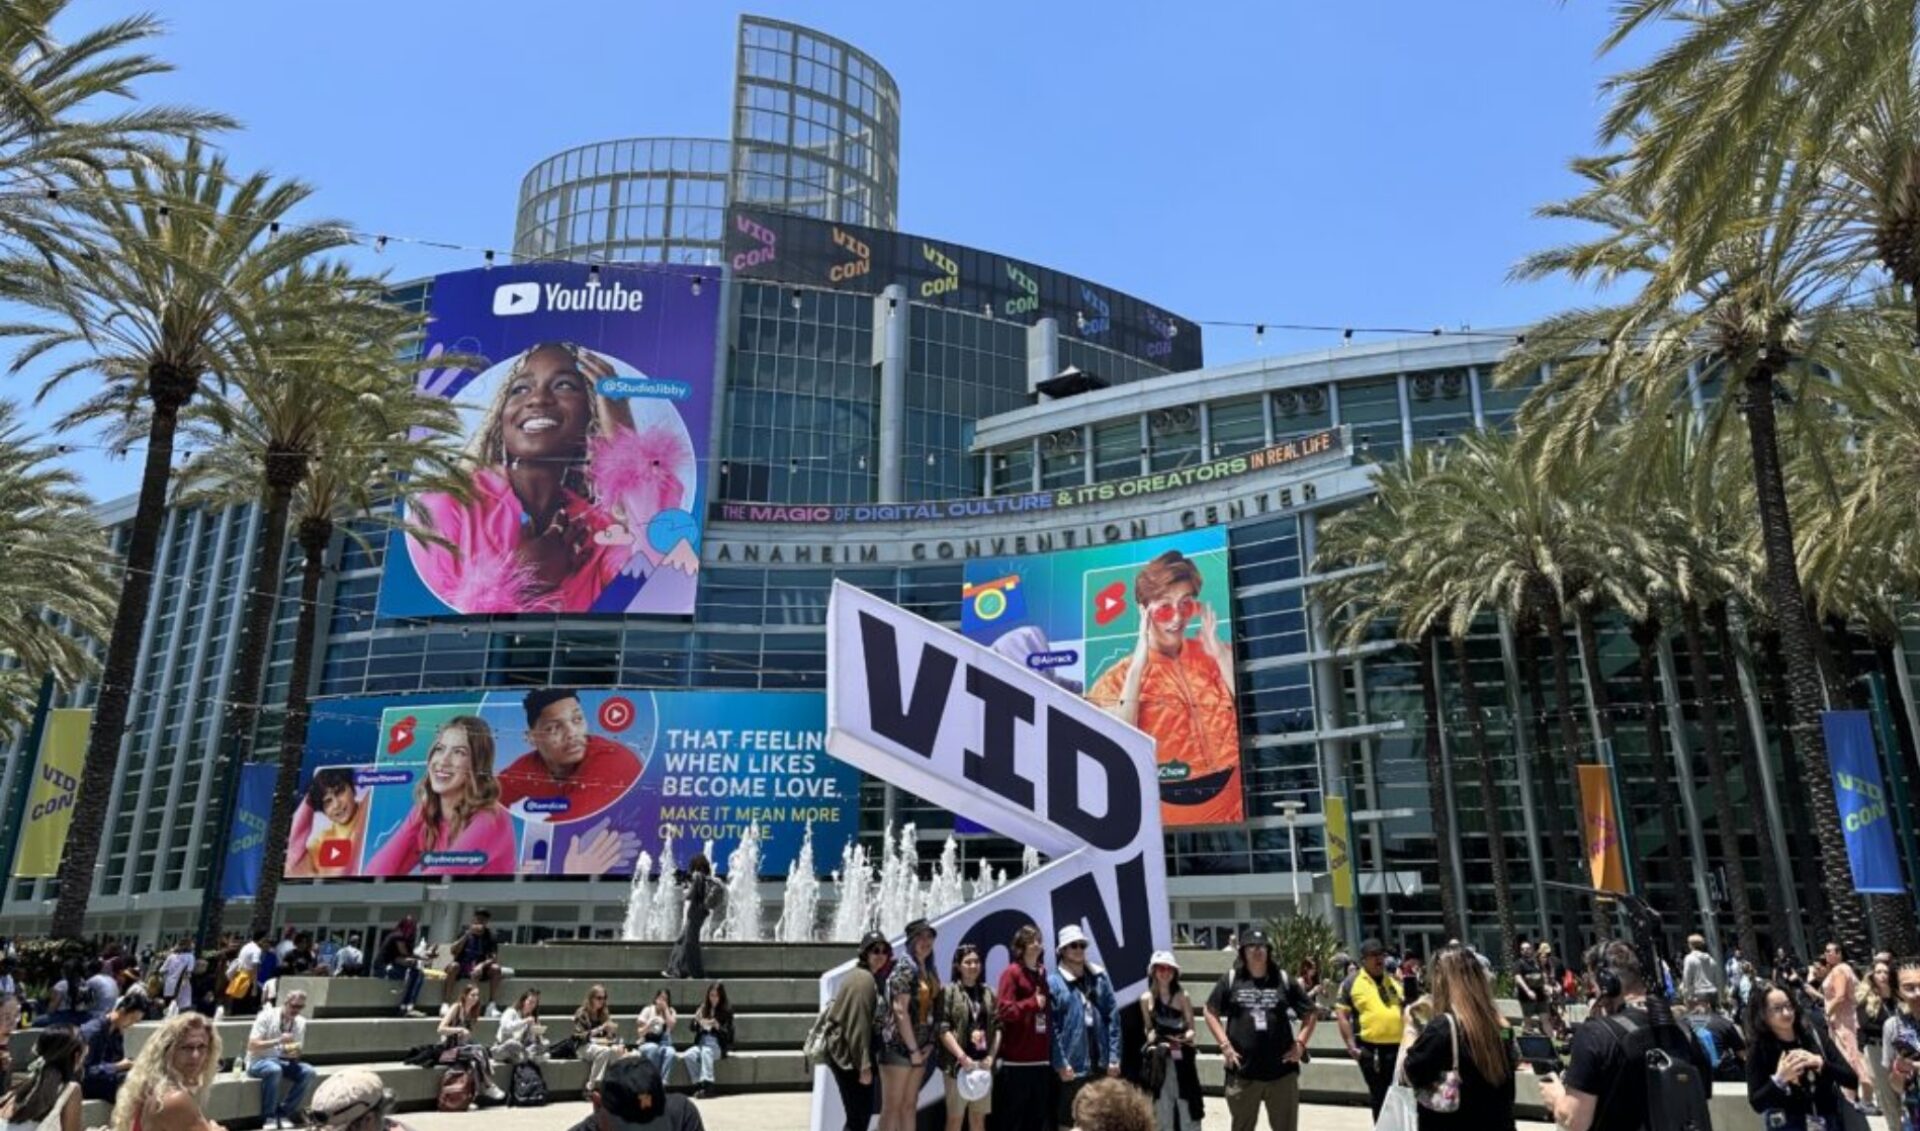 Paramount is reportedly considering a VidCon sale